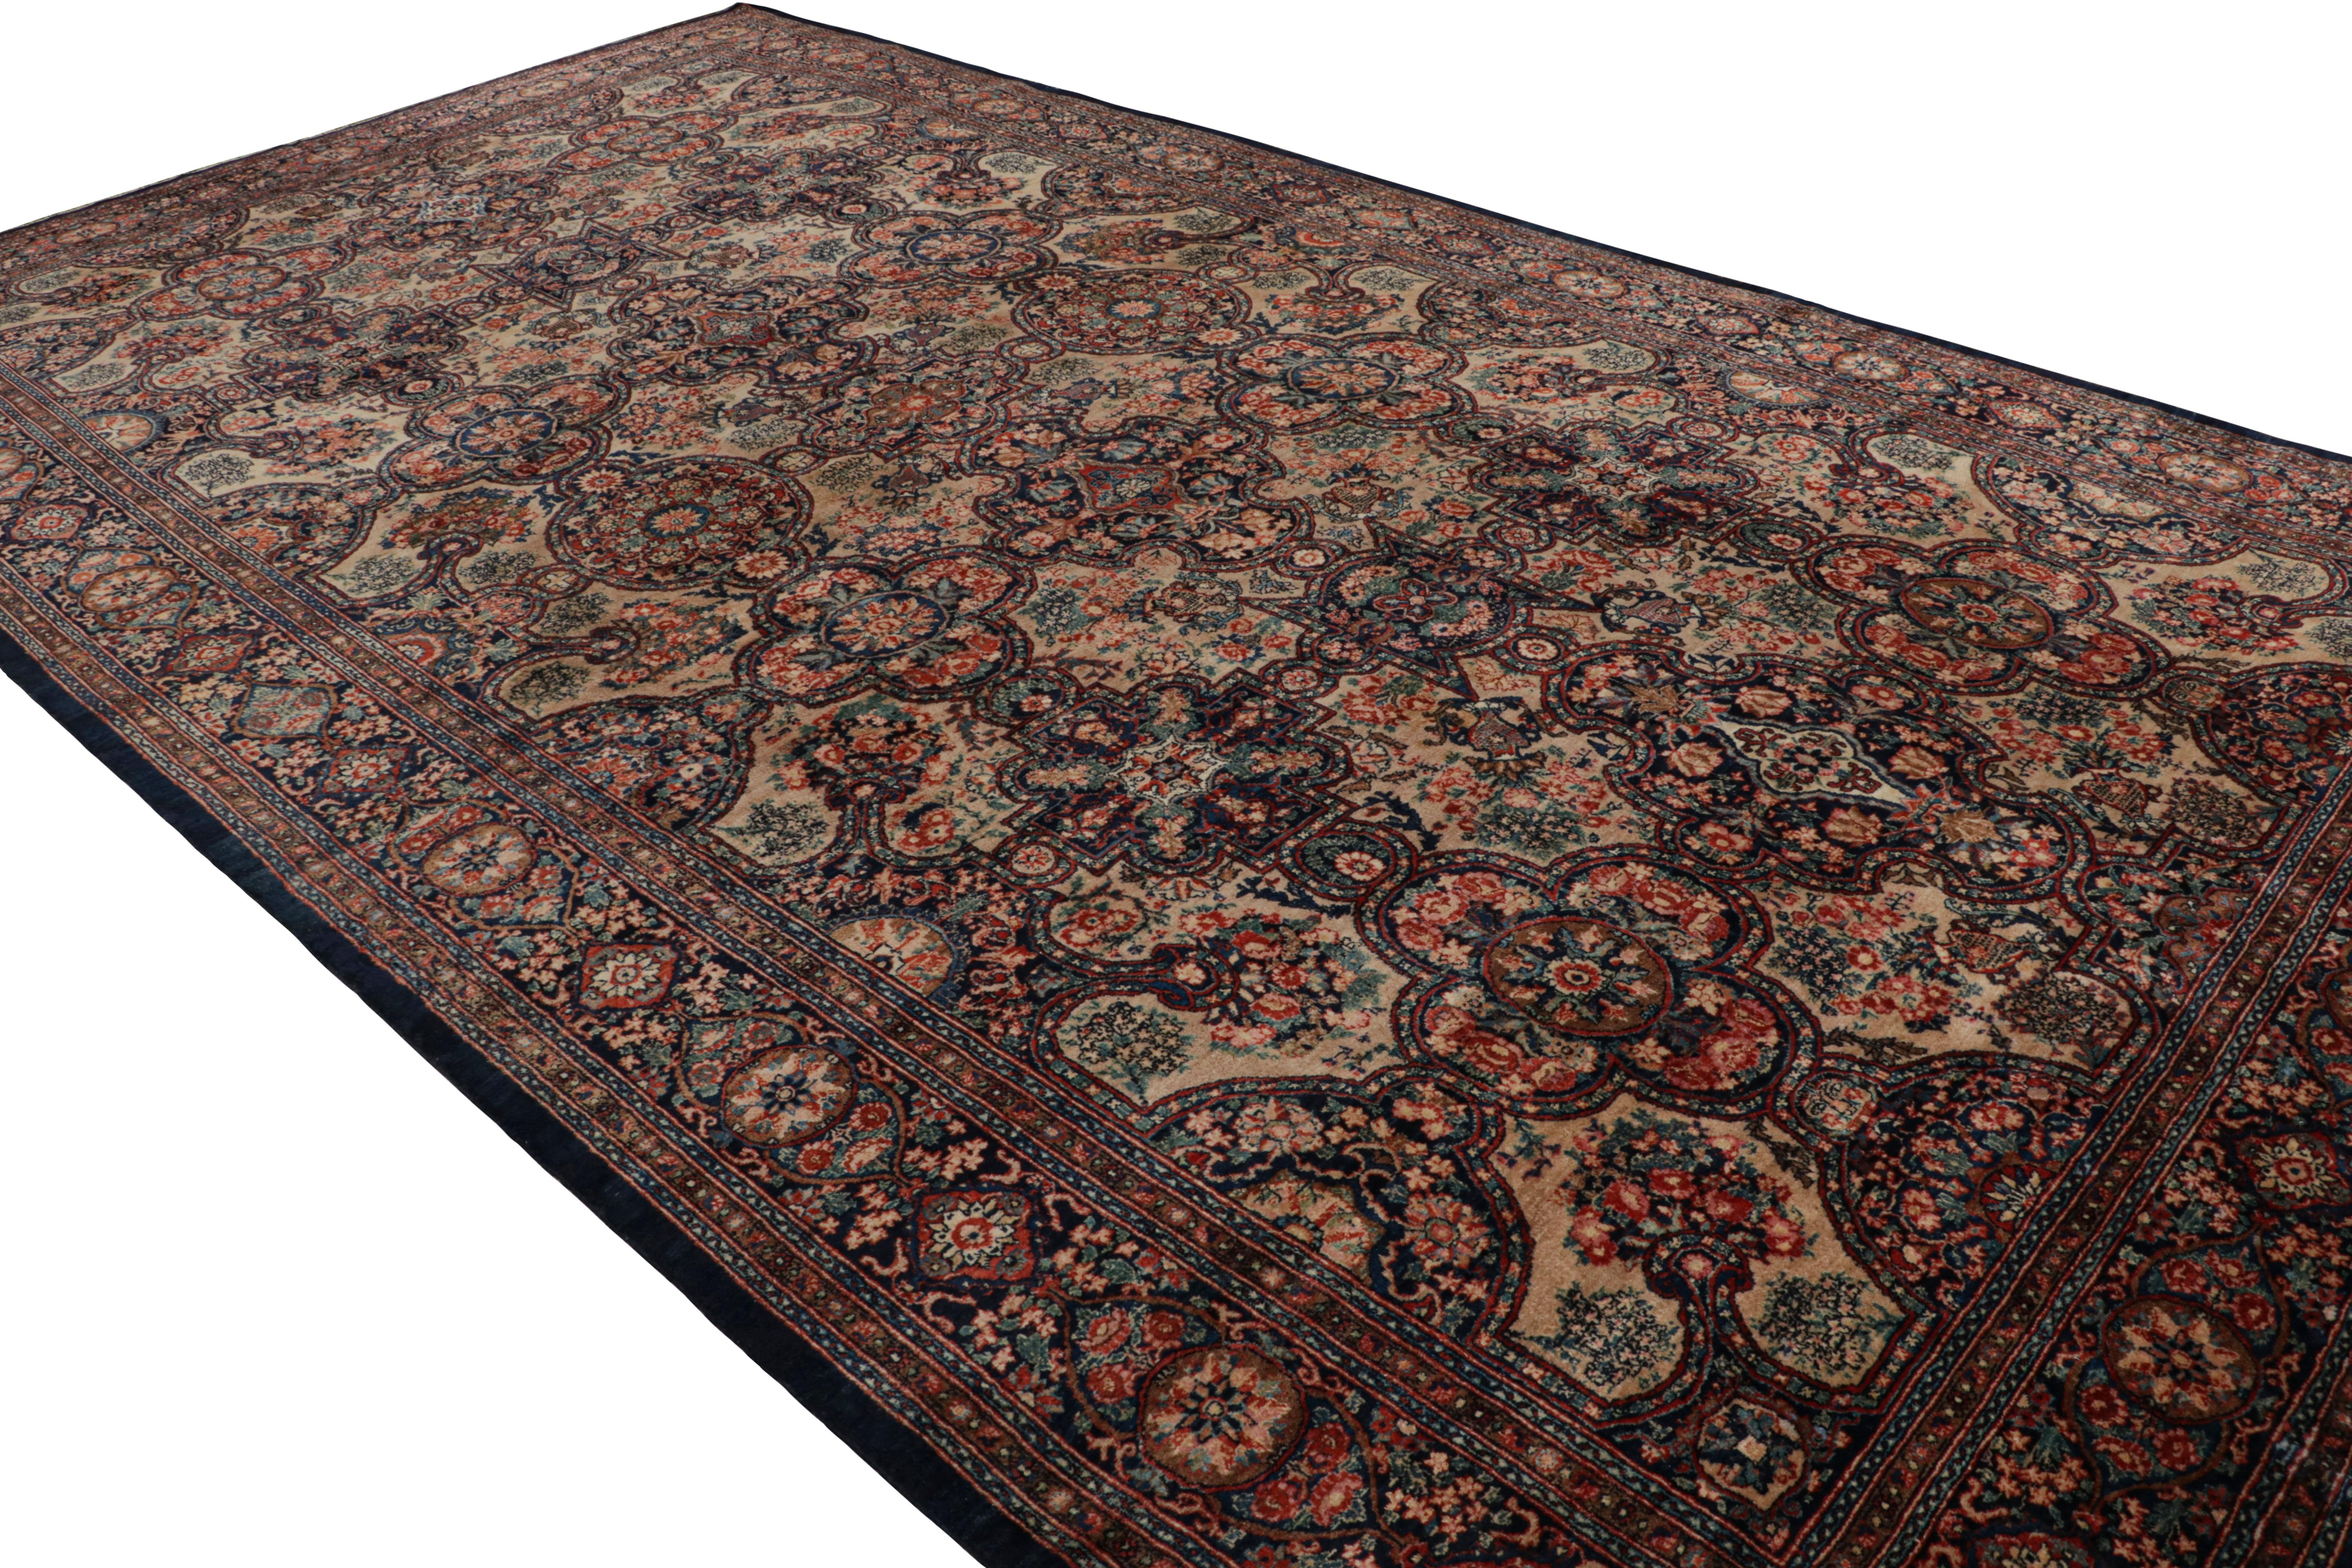 Hand knotted in wool originating circa 1890-1900, this 10 x 17 antique rug connotes an exceptionally rare Persian Bidjar rug design, both uncommon in its large size and the thoughtful colorway diversity—a seldom-seen departure from more Bidjar